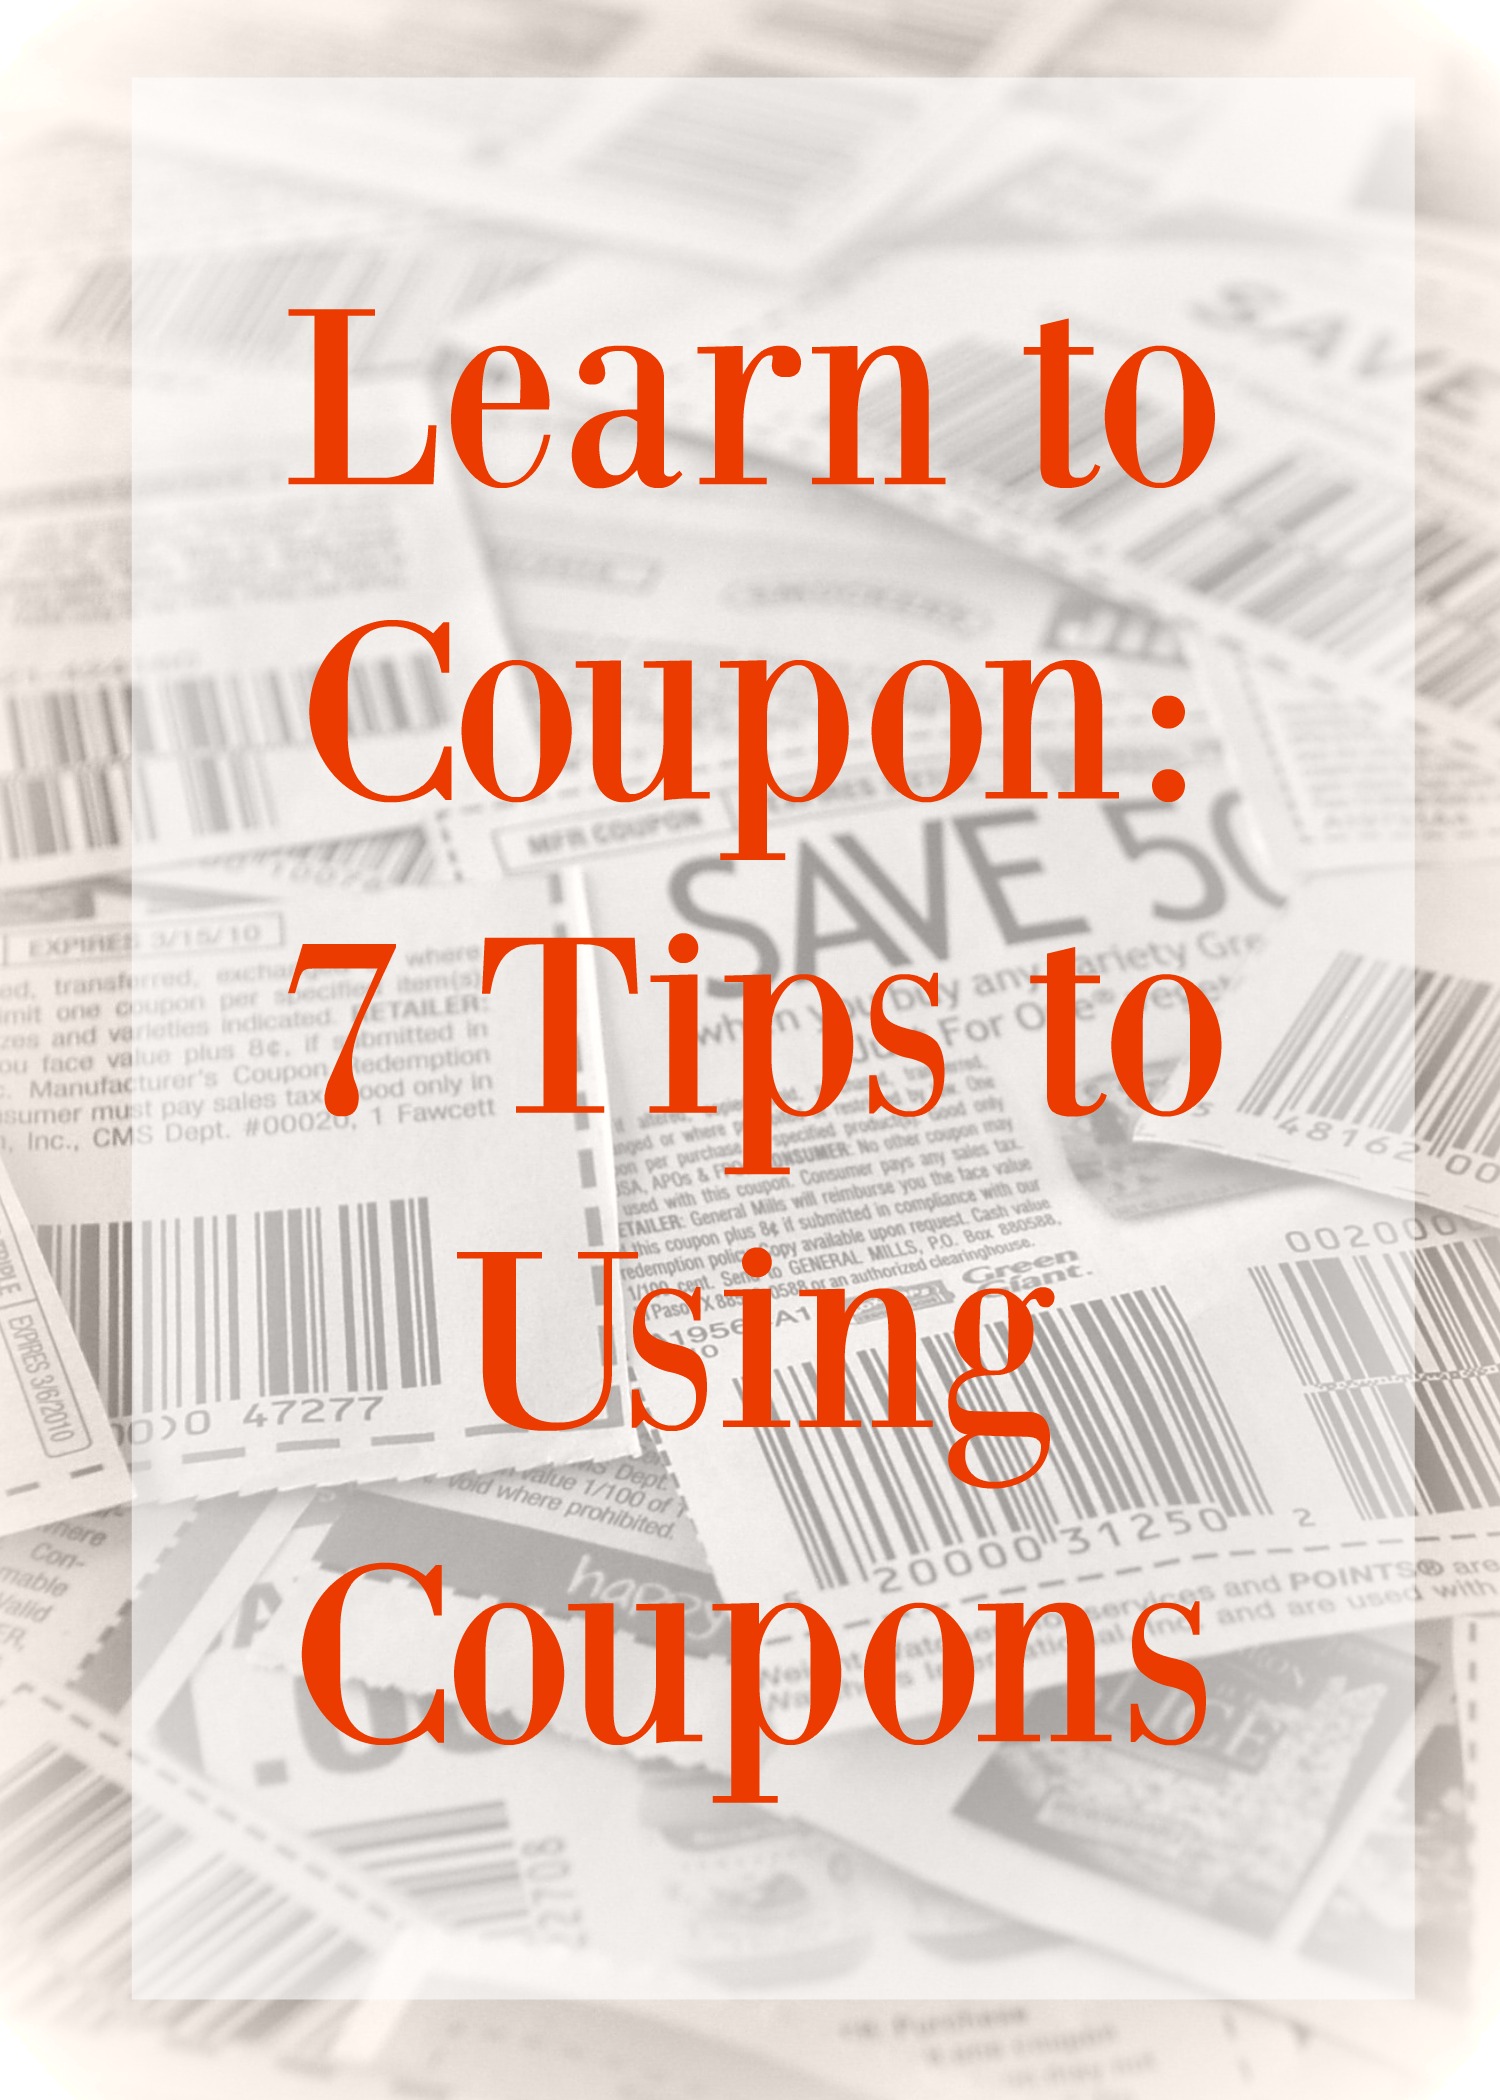 Learn how to use coupons just like real money. https://couponcravings.com